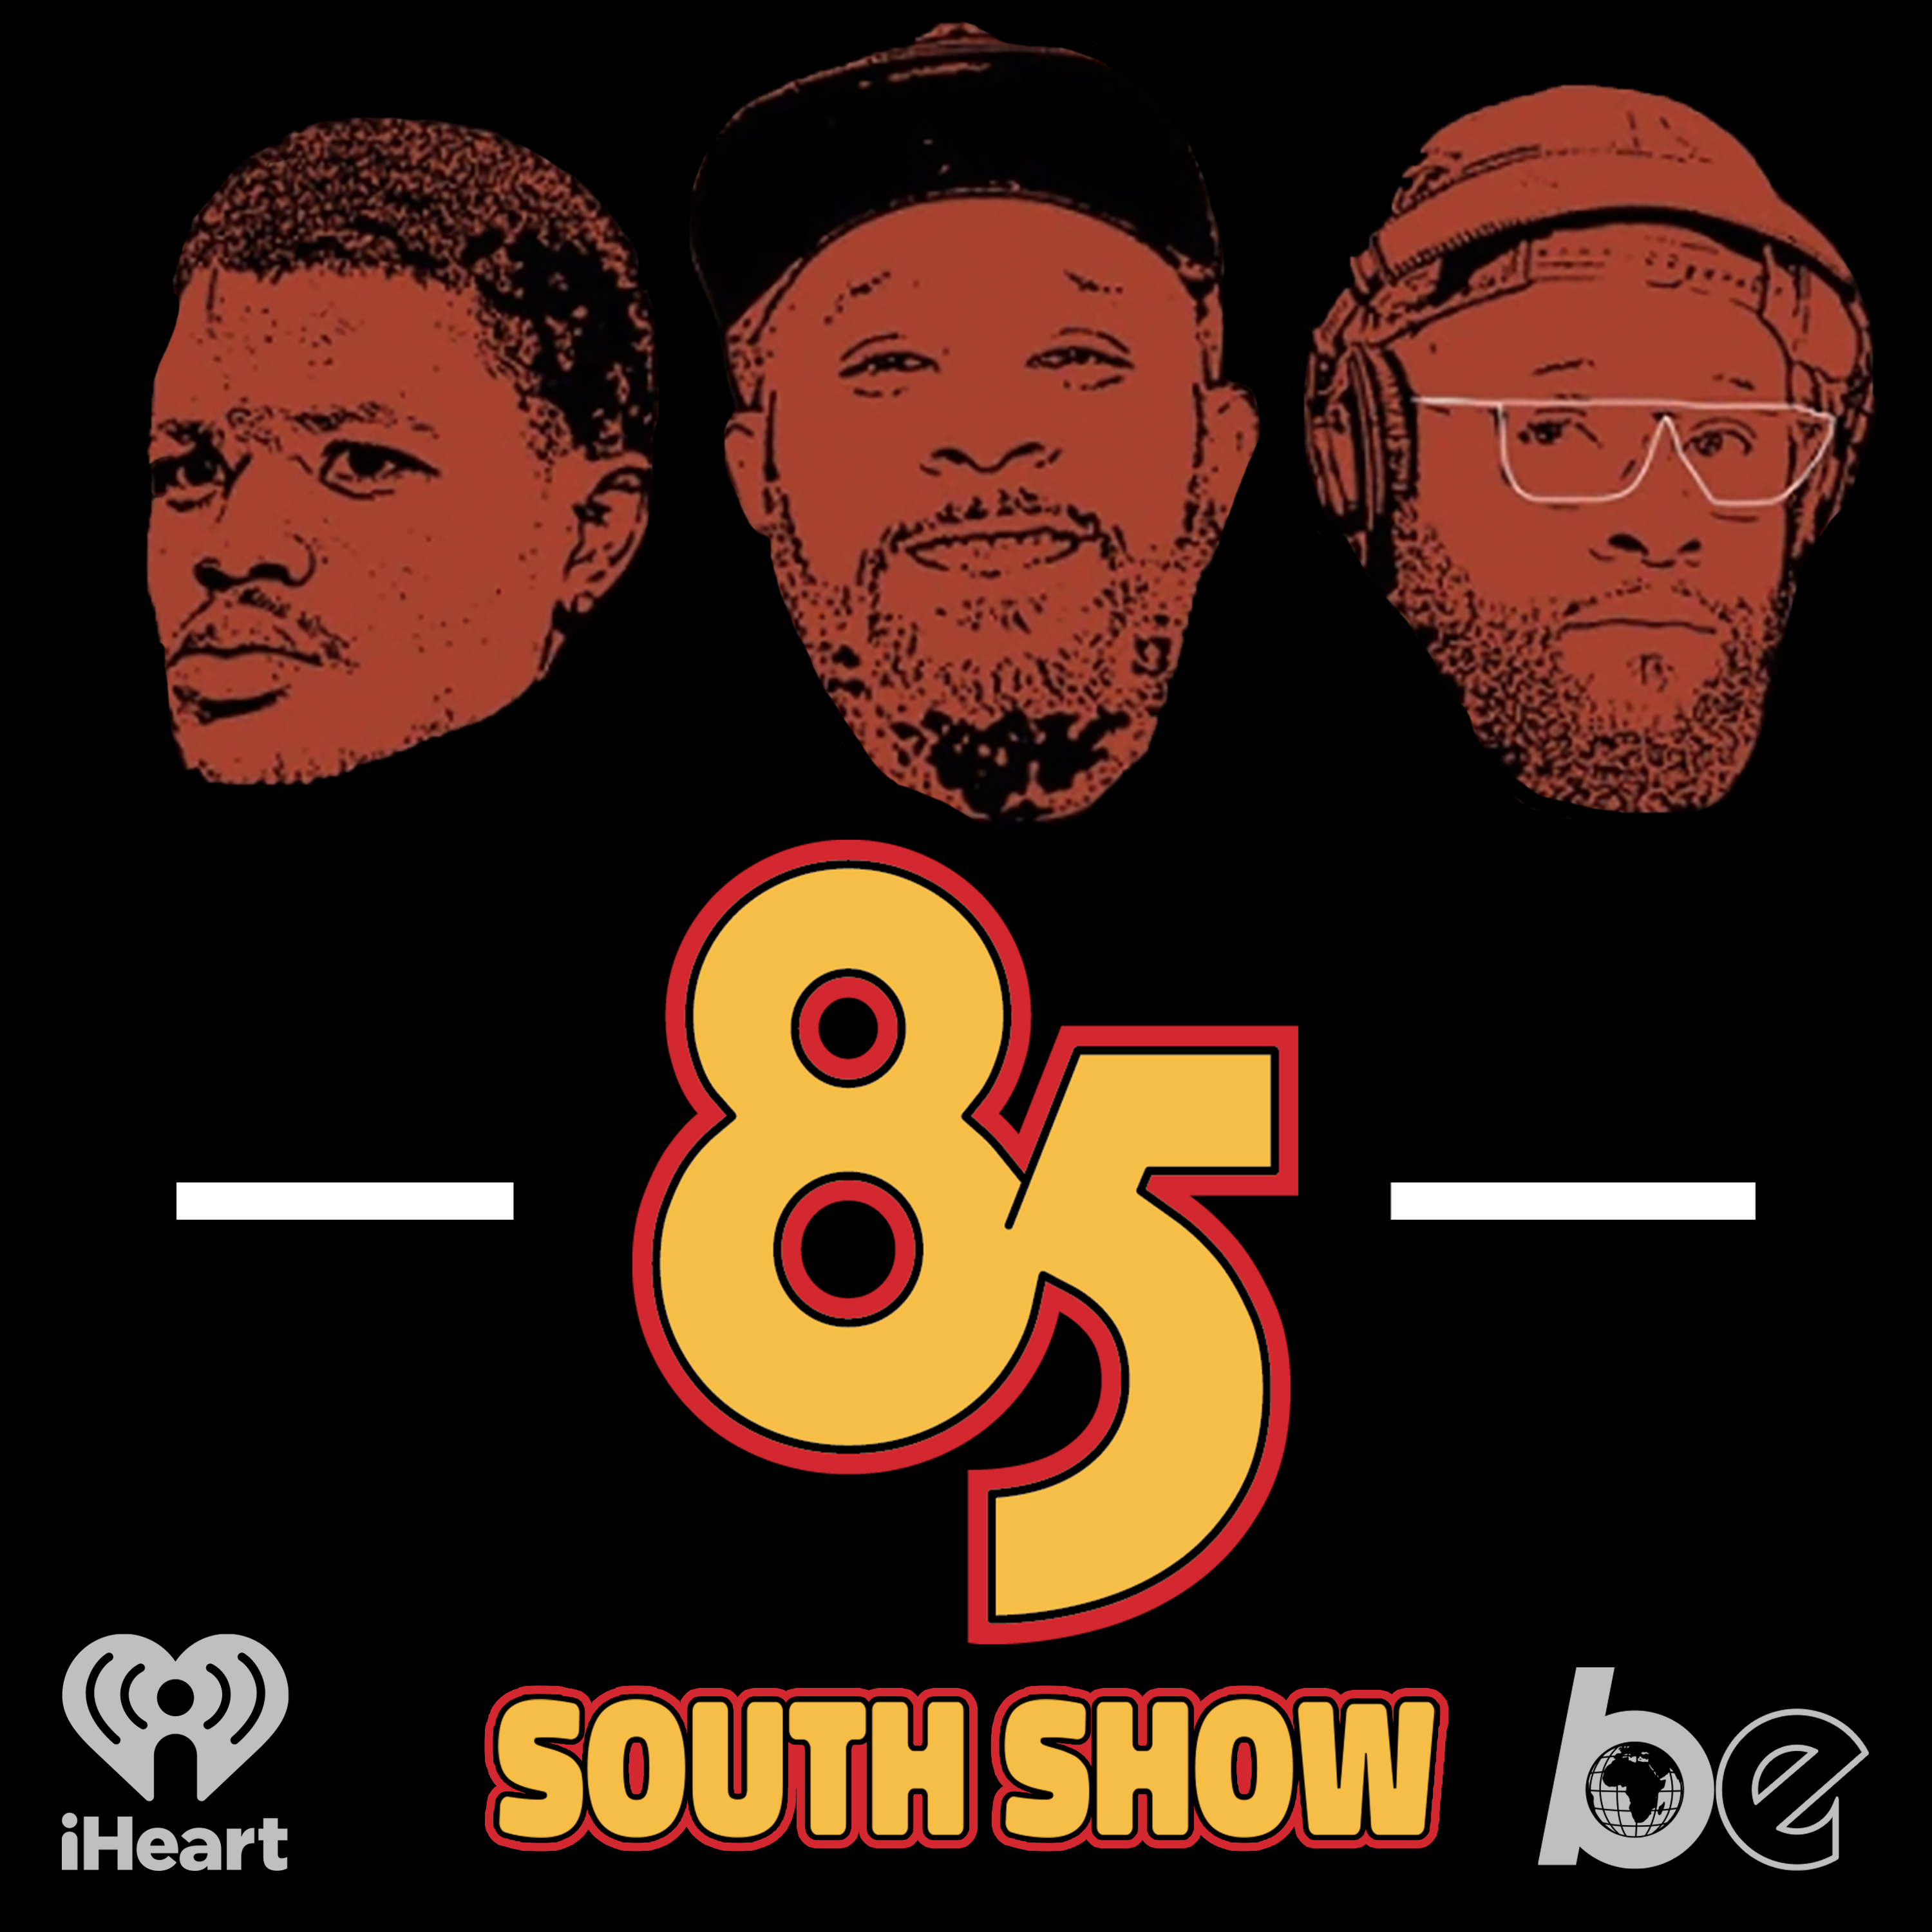 WIZ KHALIFA in the Trap! | 85 South Show Podcast